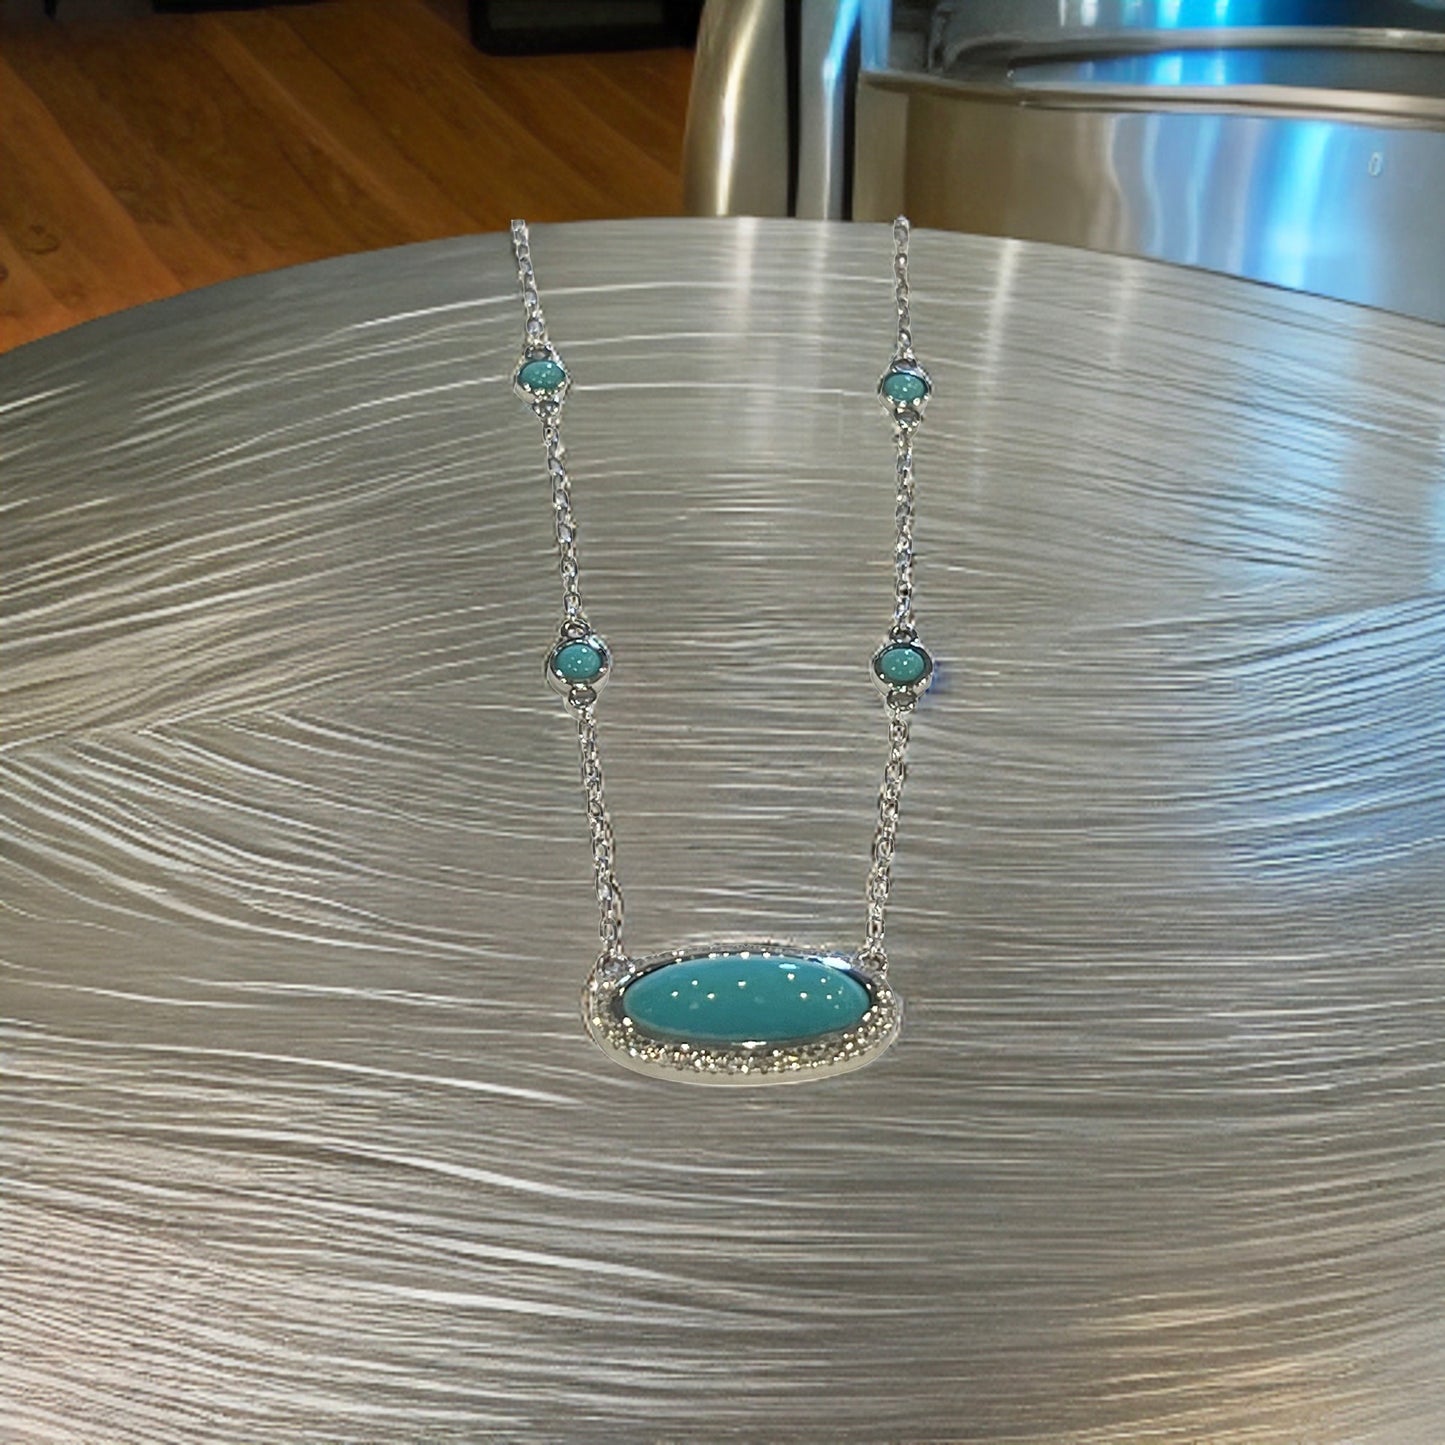 Natural Persian Turquoise Diamond Pendant Necklace 17" 14k WG 13.27 TCW Certified $5,950 308488 - Certified Fine Jewelry